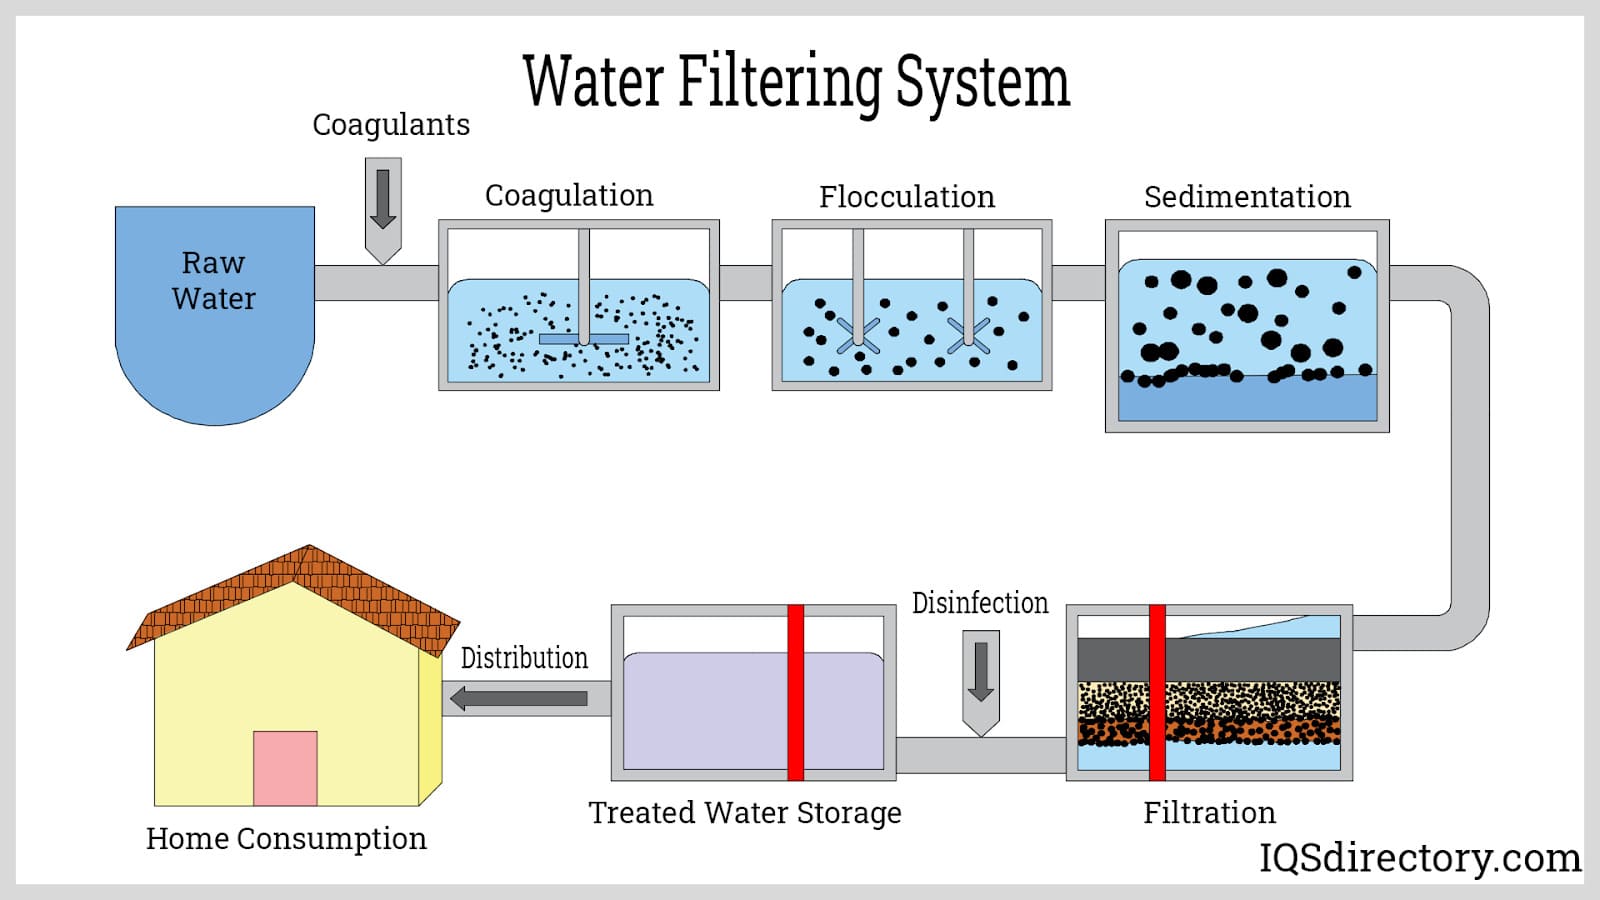 Premium filtration technology for perfect drinking water.